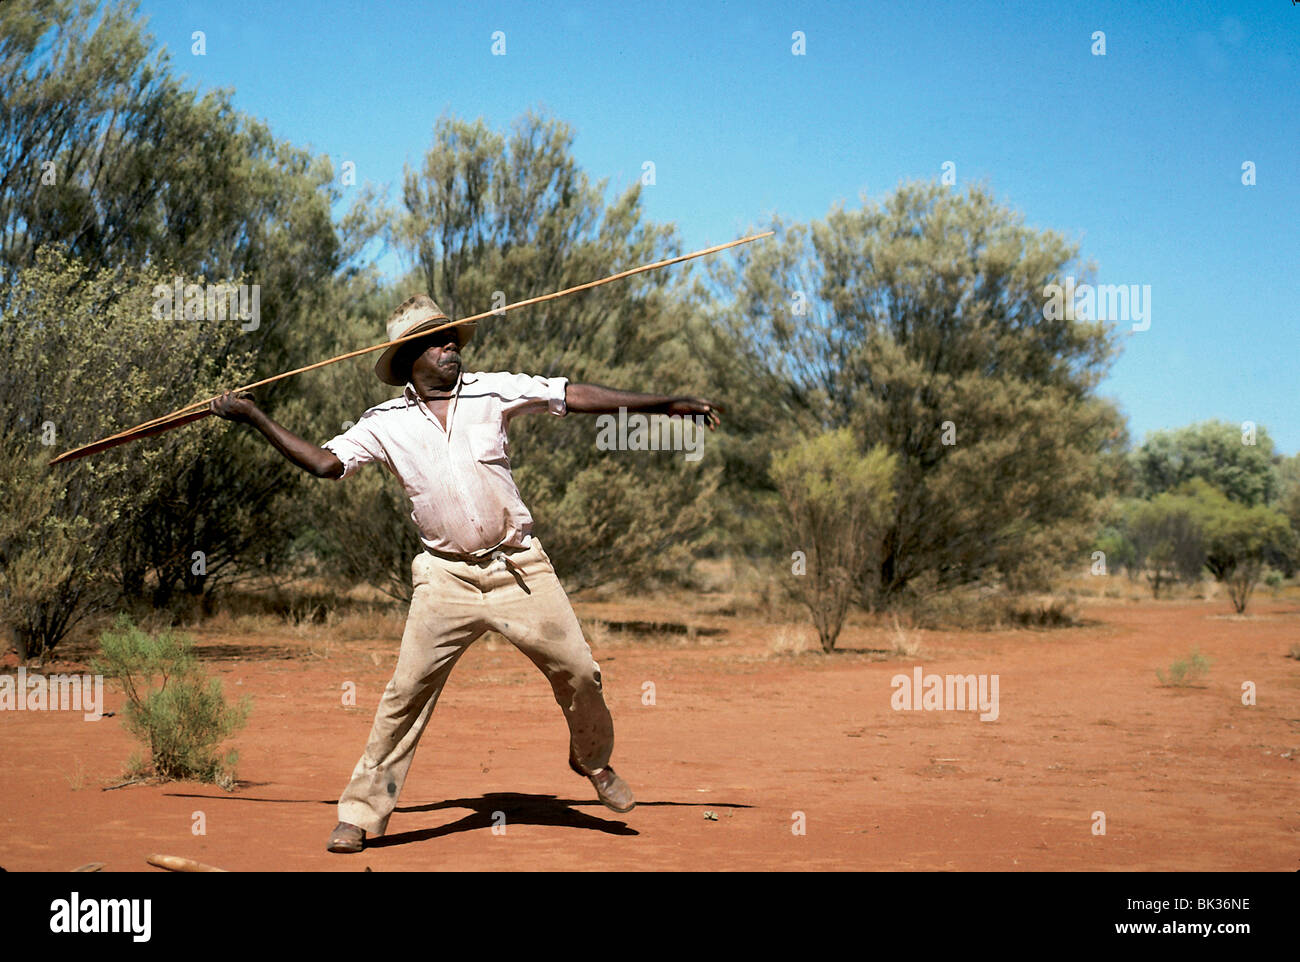 An adult Aborigine male using a throwing sling with a spear in Rod Steinert's Aboriginal Dreamtime Tour, Australia Stock Photo